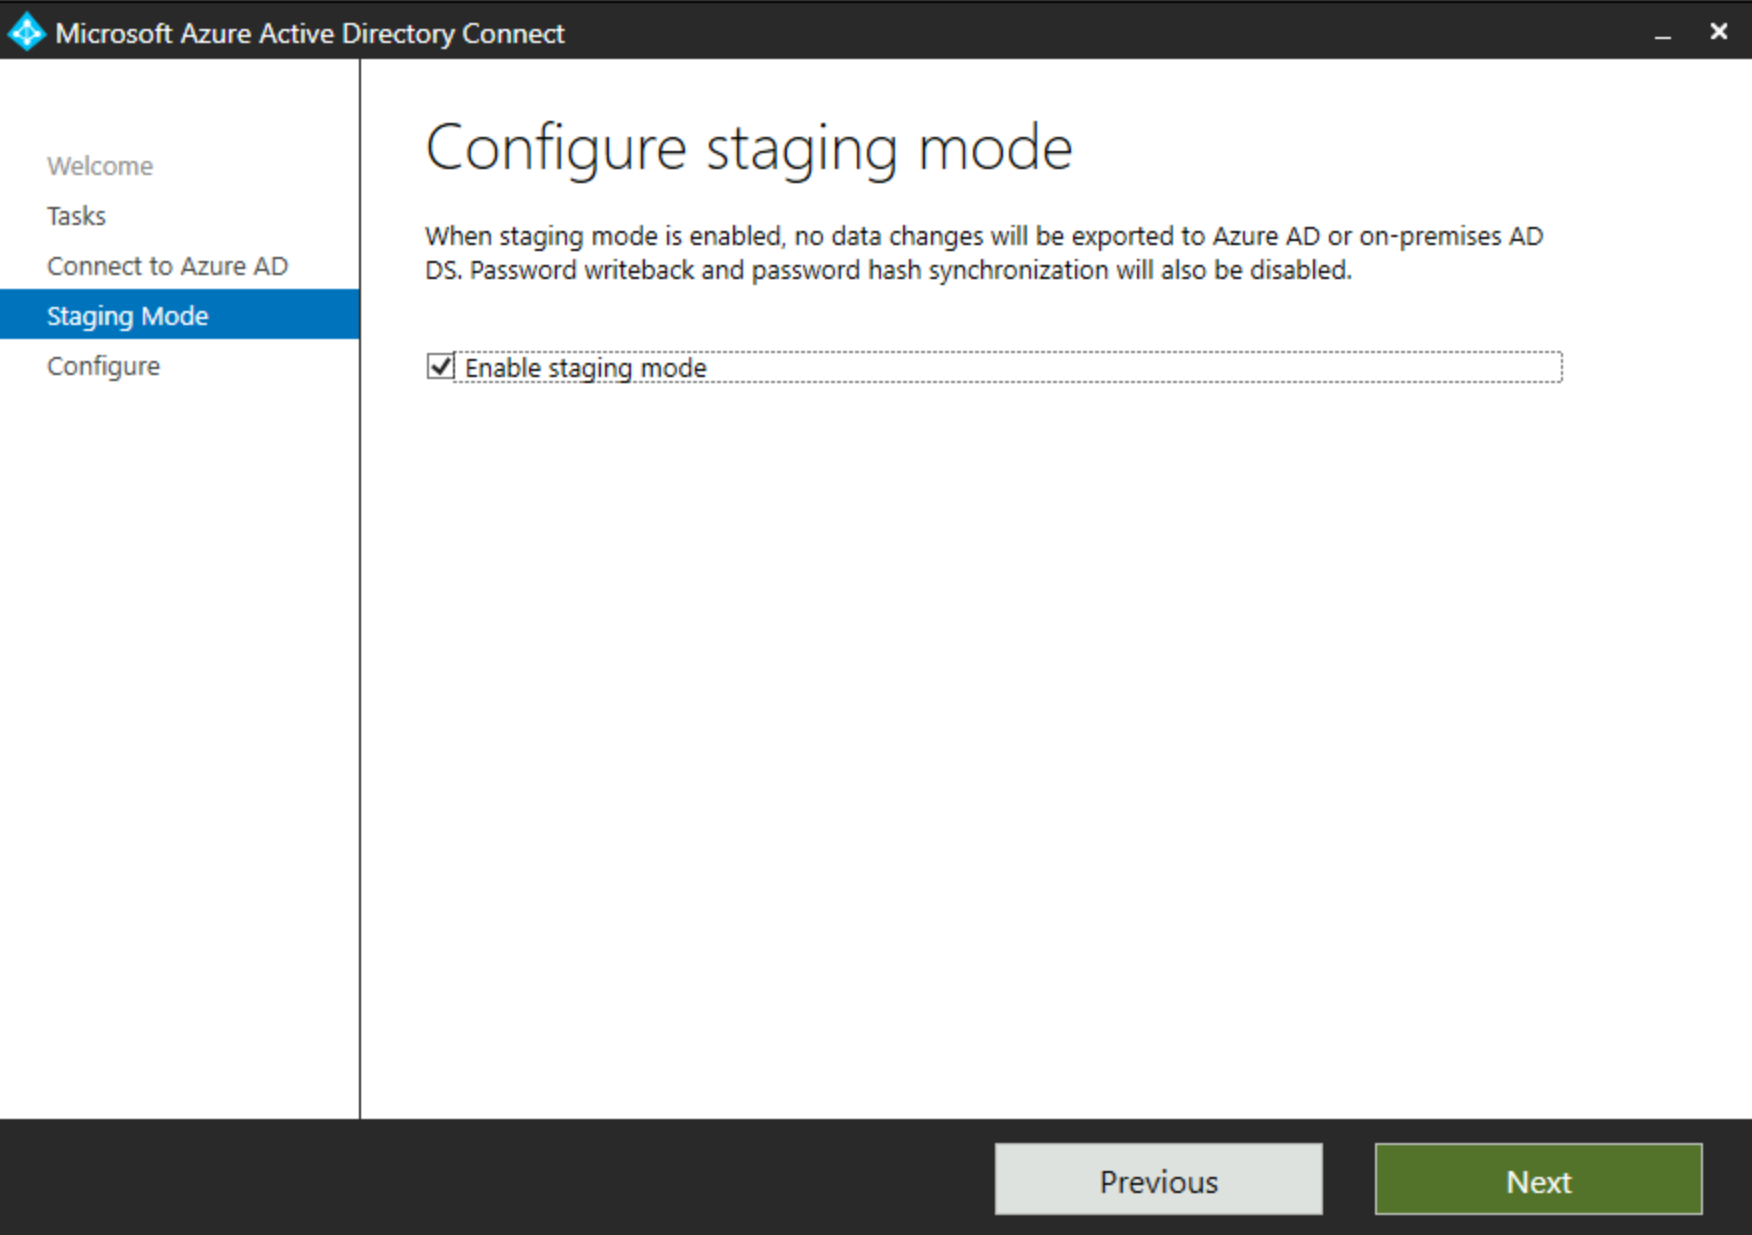 Screenshot shows Staging Mode configuration in the Active Microsoft Entra Connect dialog box.